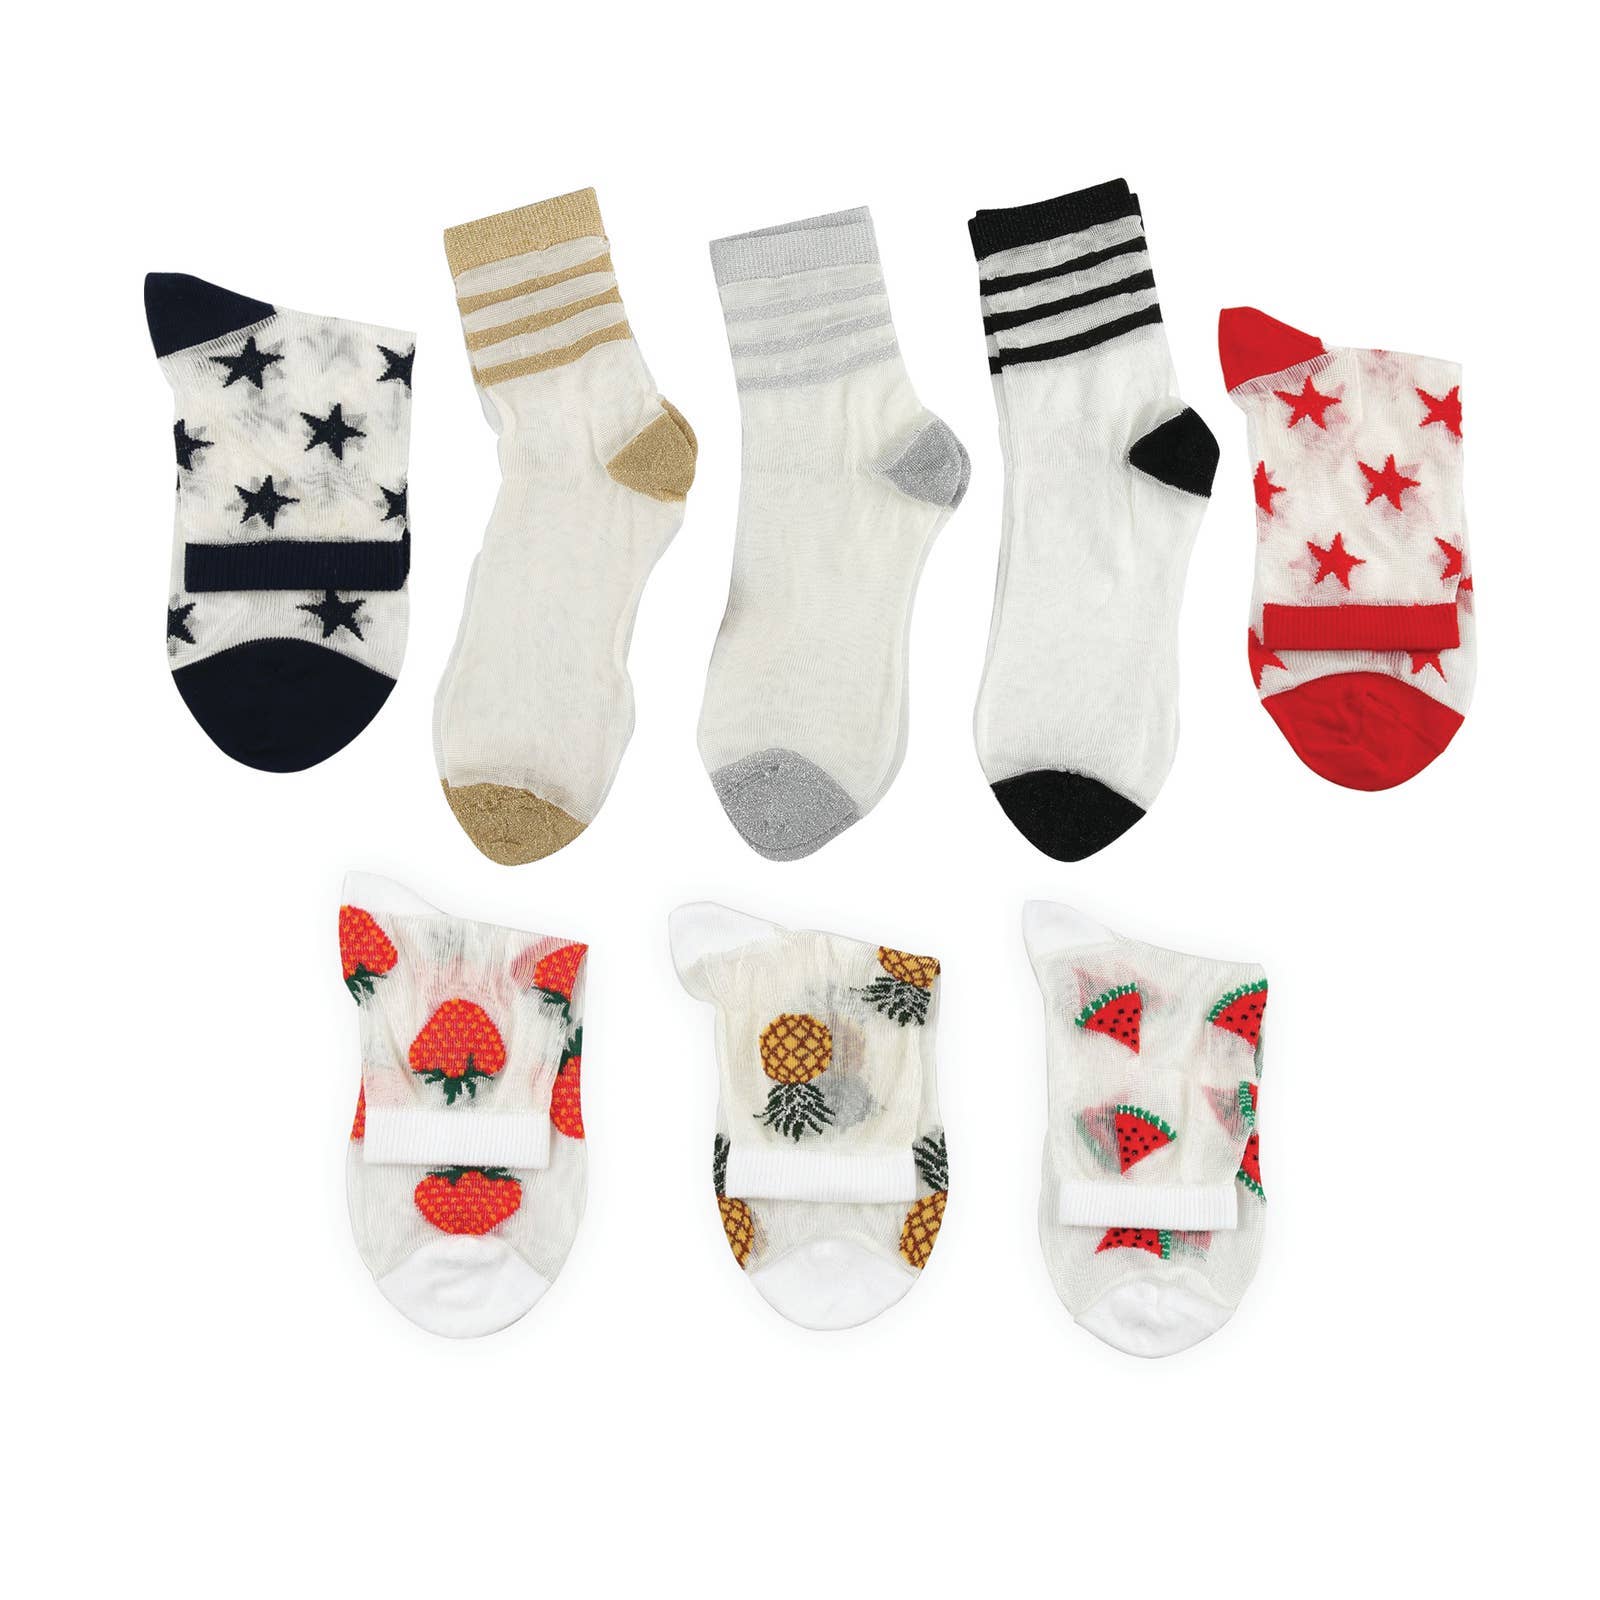 bundle of sheer women's socks, offering a variety of stylish and elegant designs in one convenient package.